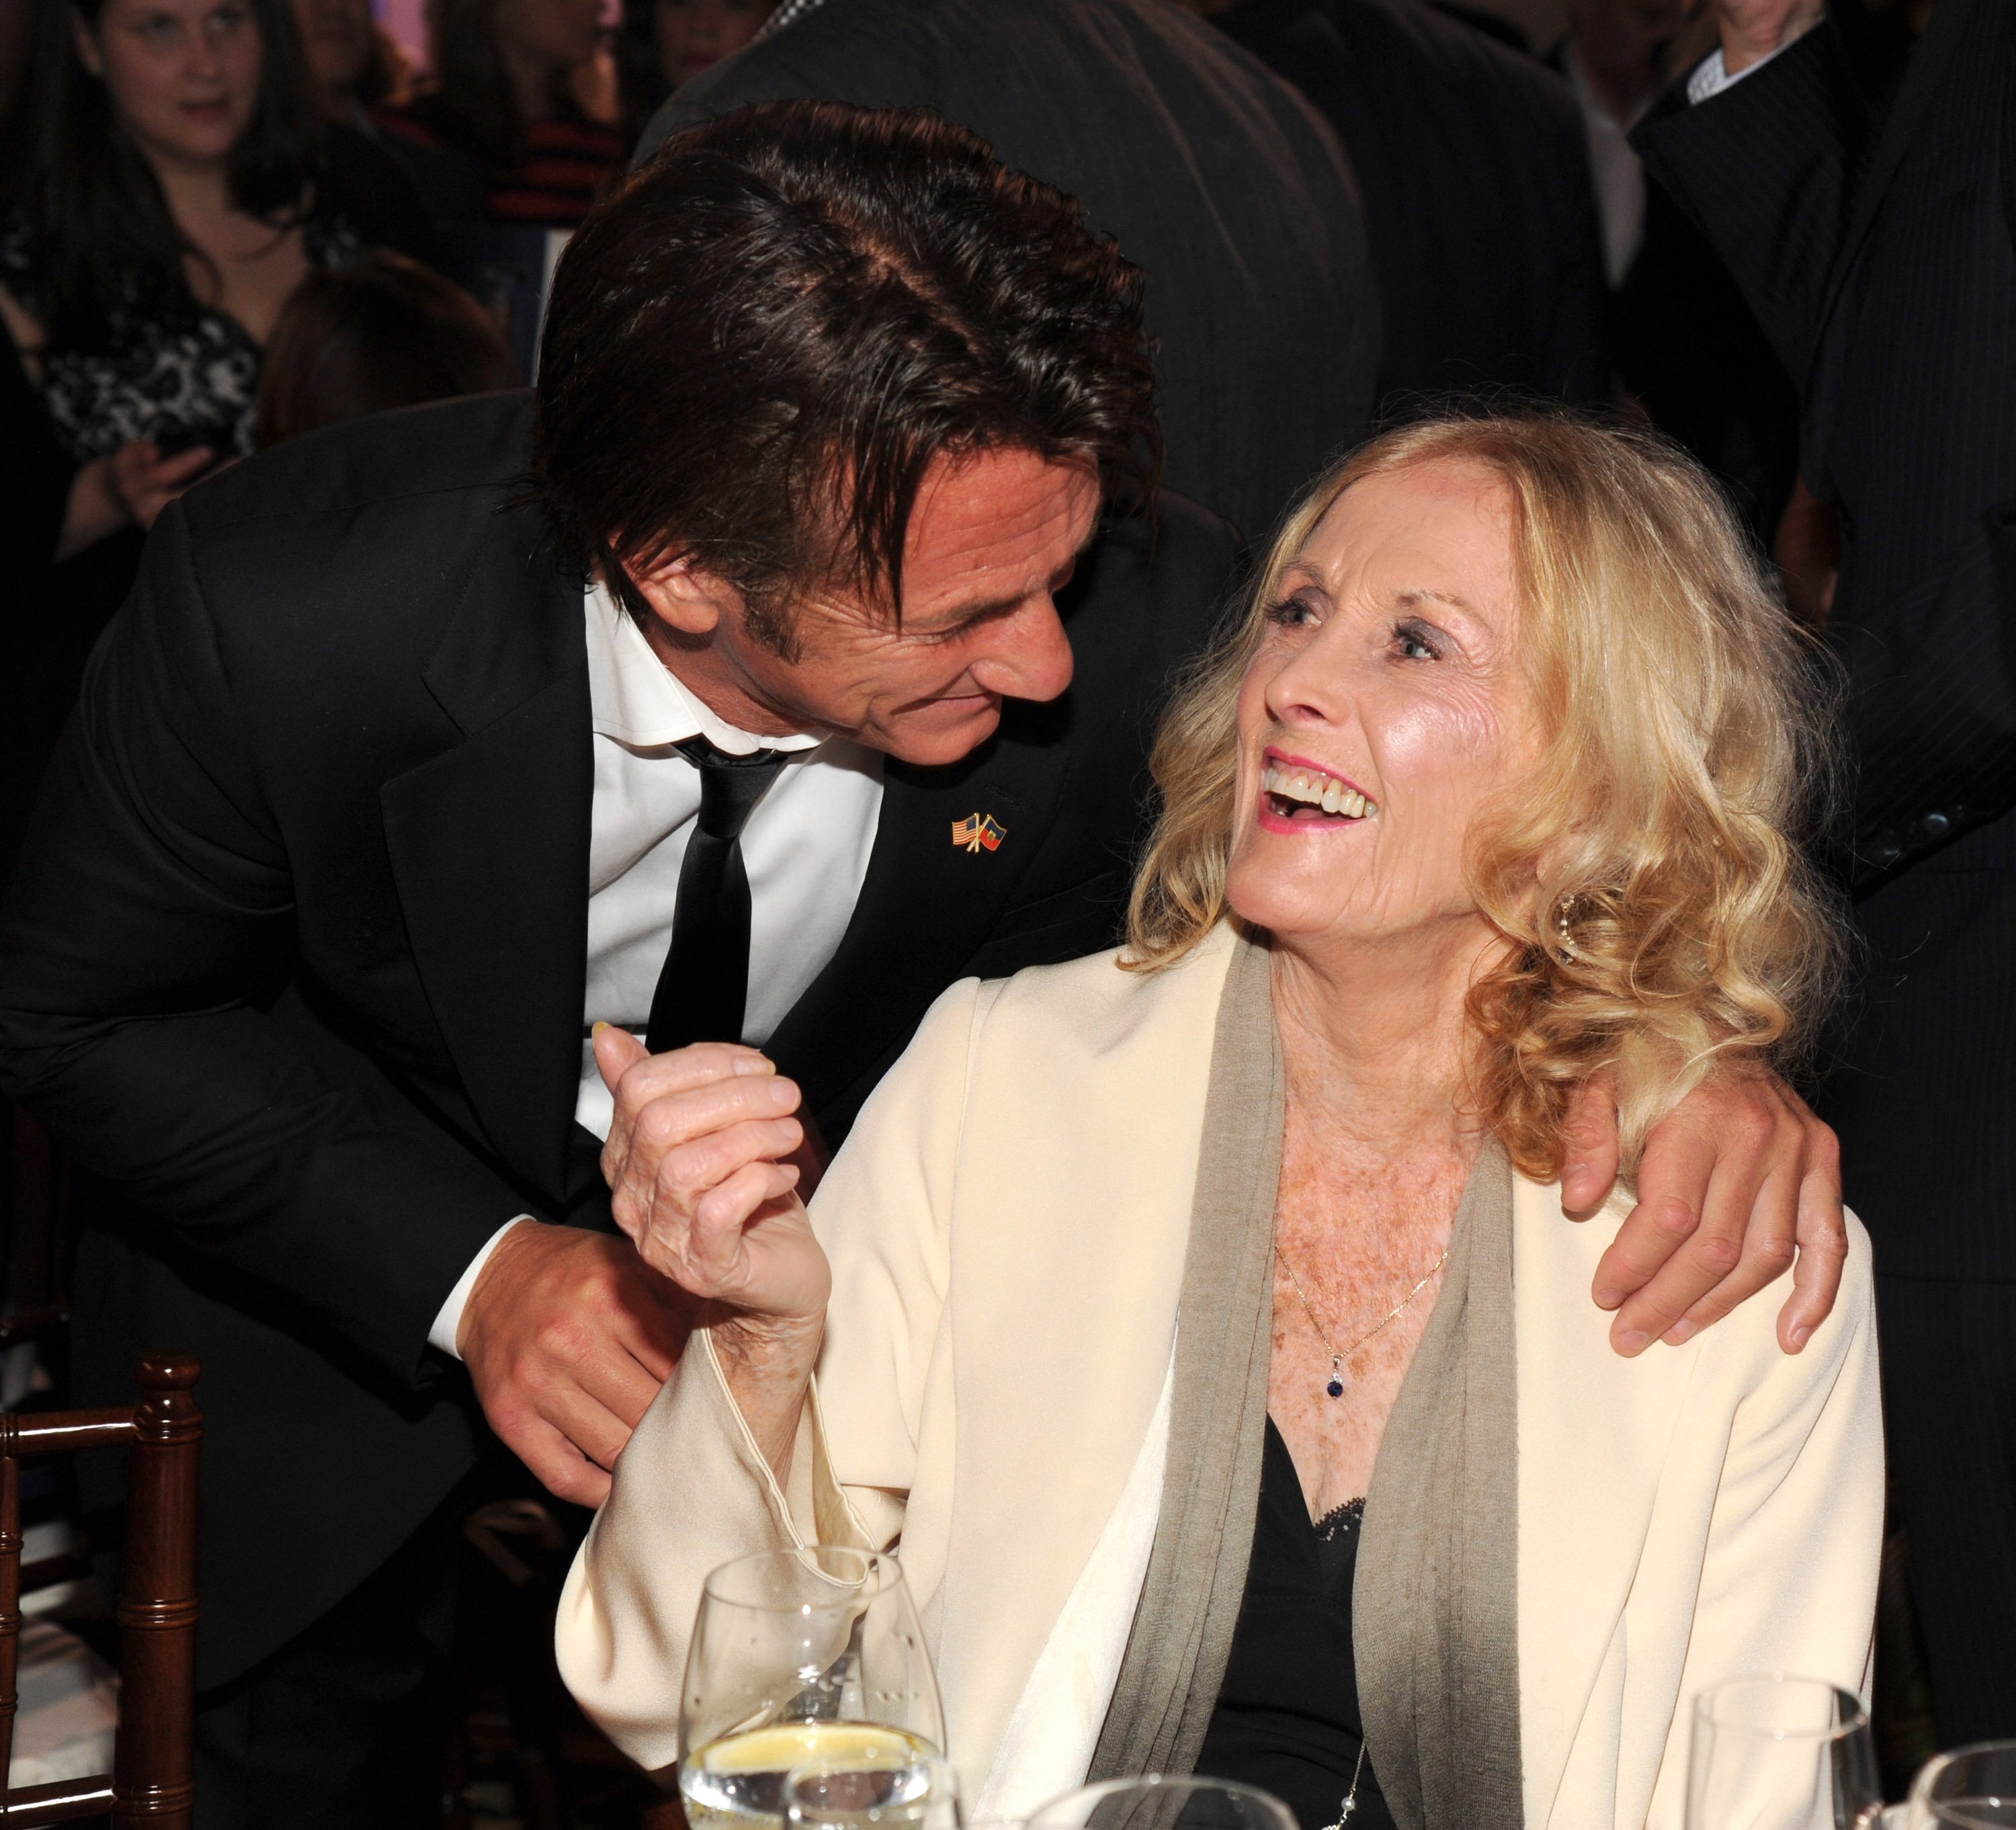 Sean Penn and Eileen Ryan Penn attend the 3rd annual Sean Penn & Friends HELP HAITI HOME Gala benefiting J/P HRO presented by Giorgio Armani at Montage Beverly Hills on January 11, 2014, in Beverly Hills, California. | Source: Getty Images